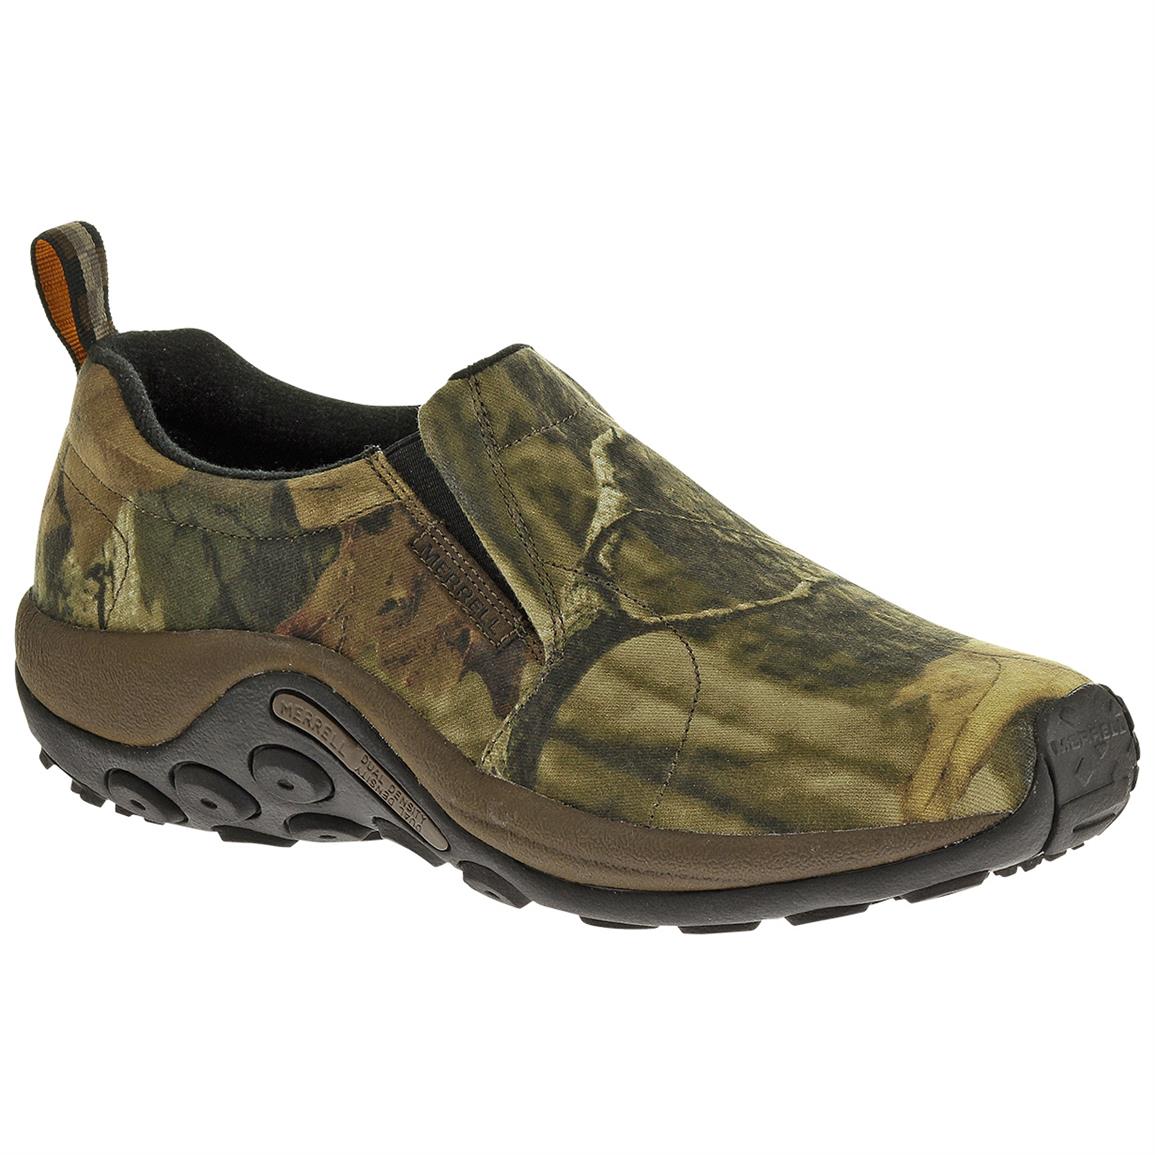 Merrell Jungle Moc Camo Shoes - 617452, Casual Shoes at Sportsman's Guide